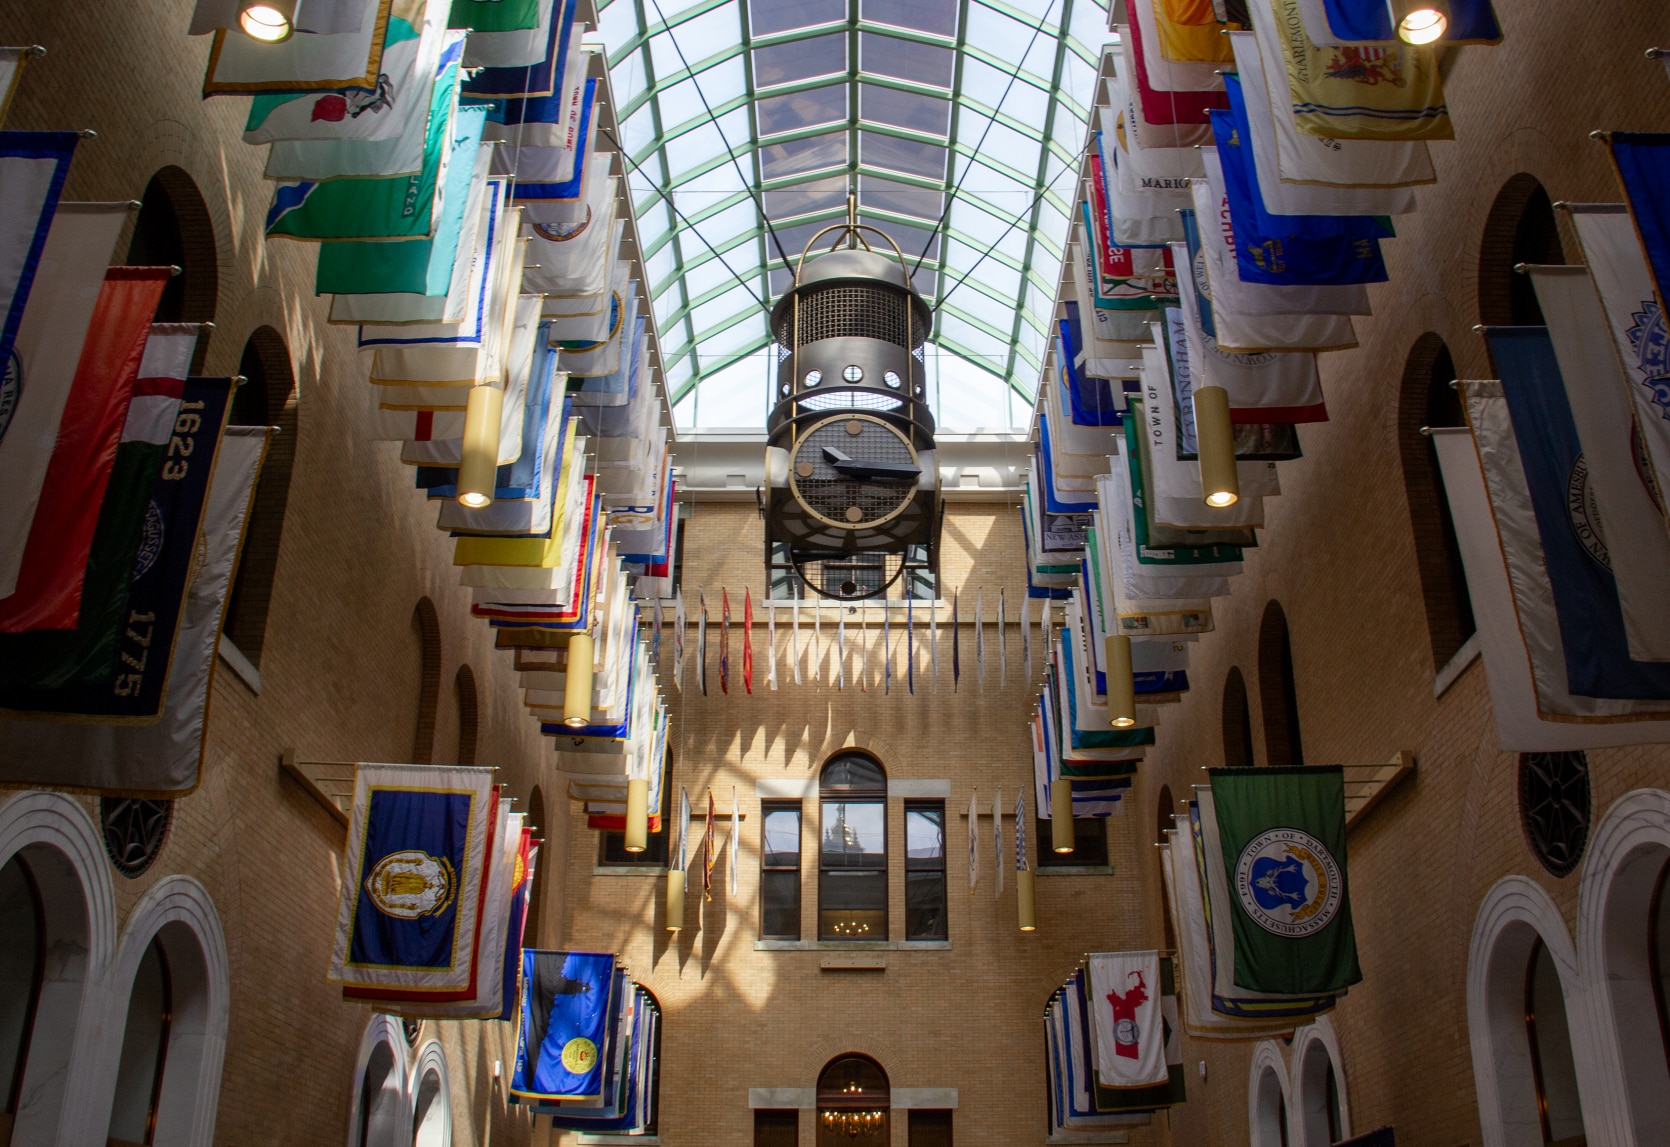 The Great Hall, a brick room with a glass ceiling and hundreds of flags hung.